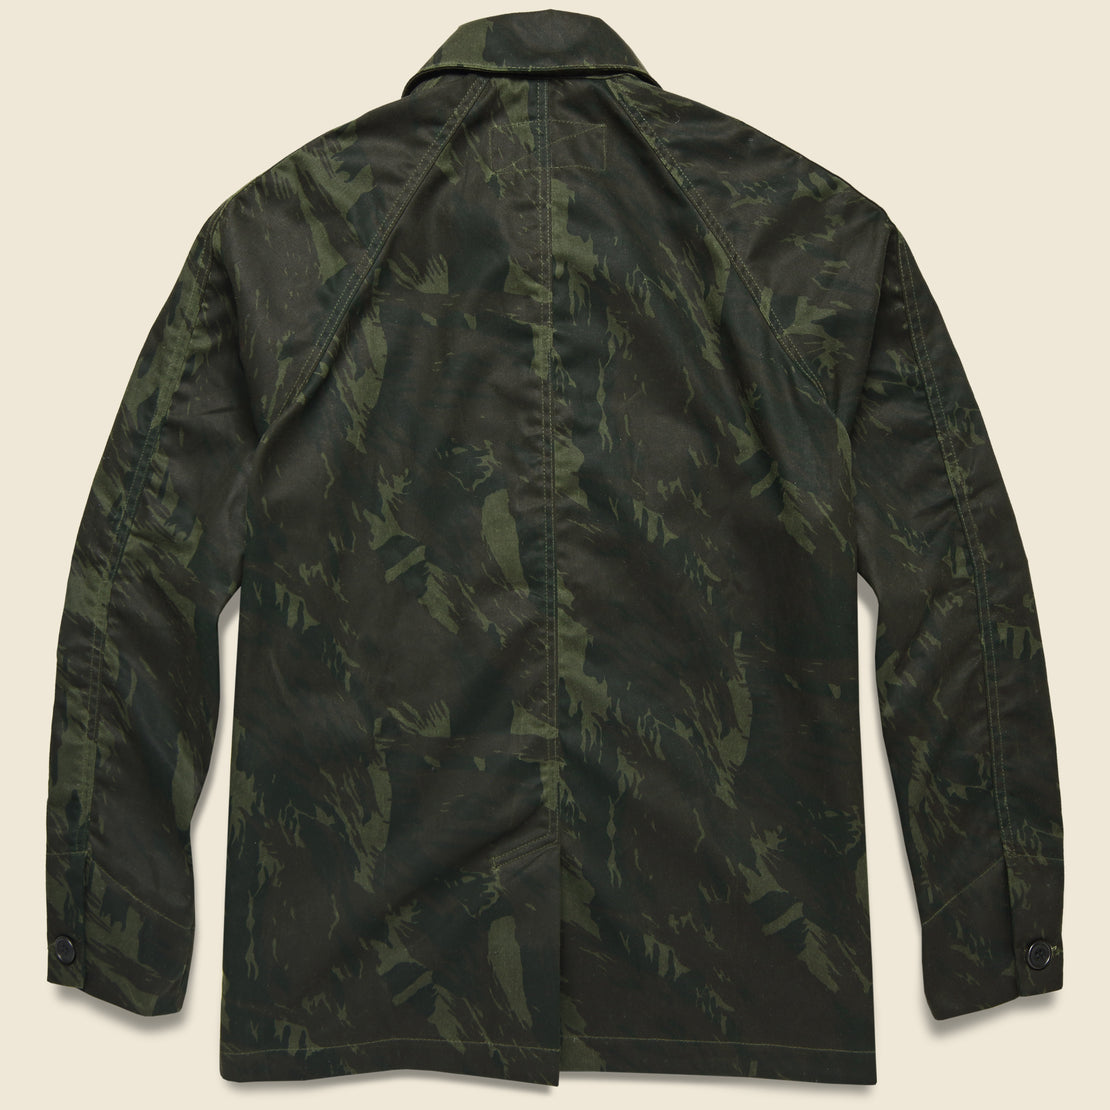 Waxed Canvas Explorer Jacket - Camo - Rogue Territory - STAG Provisions - Outerwear - Coat / Jacket